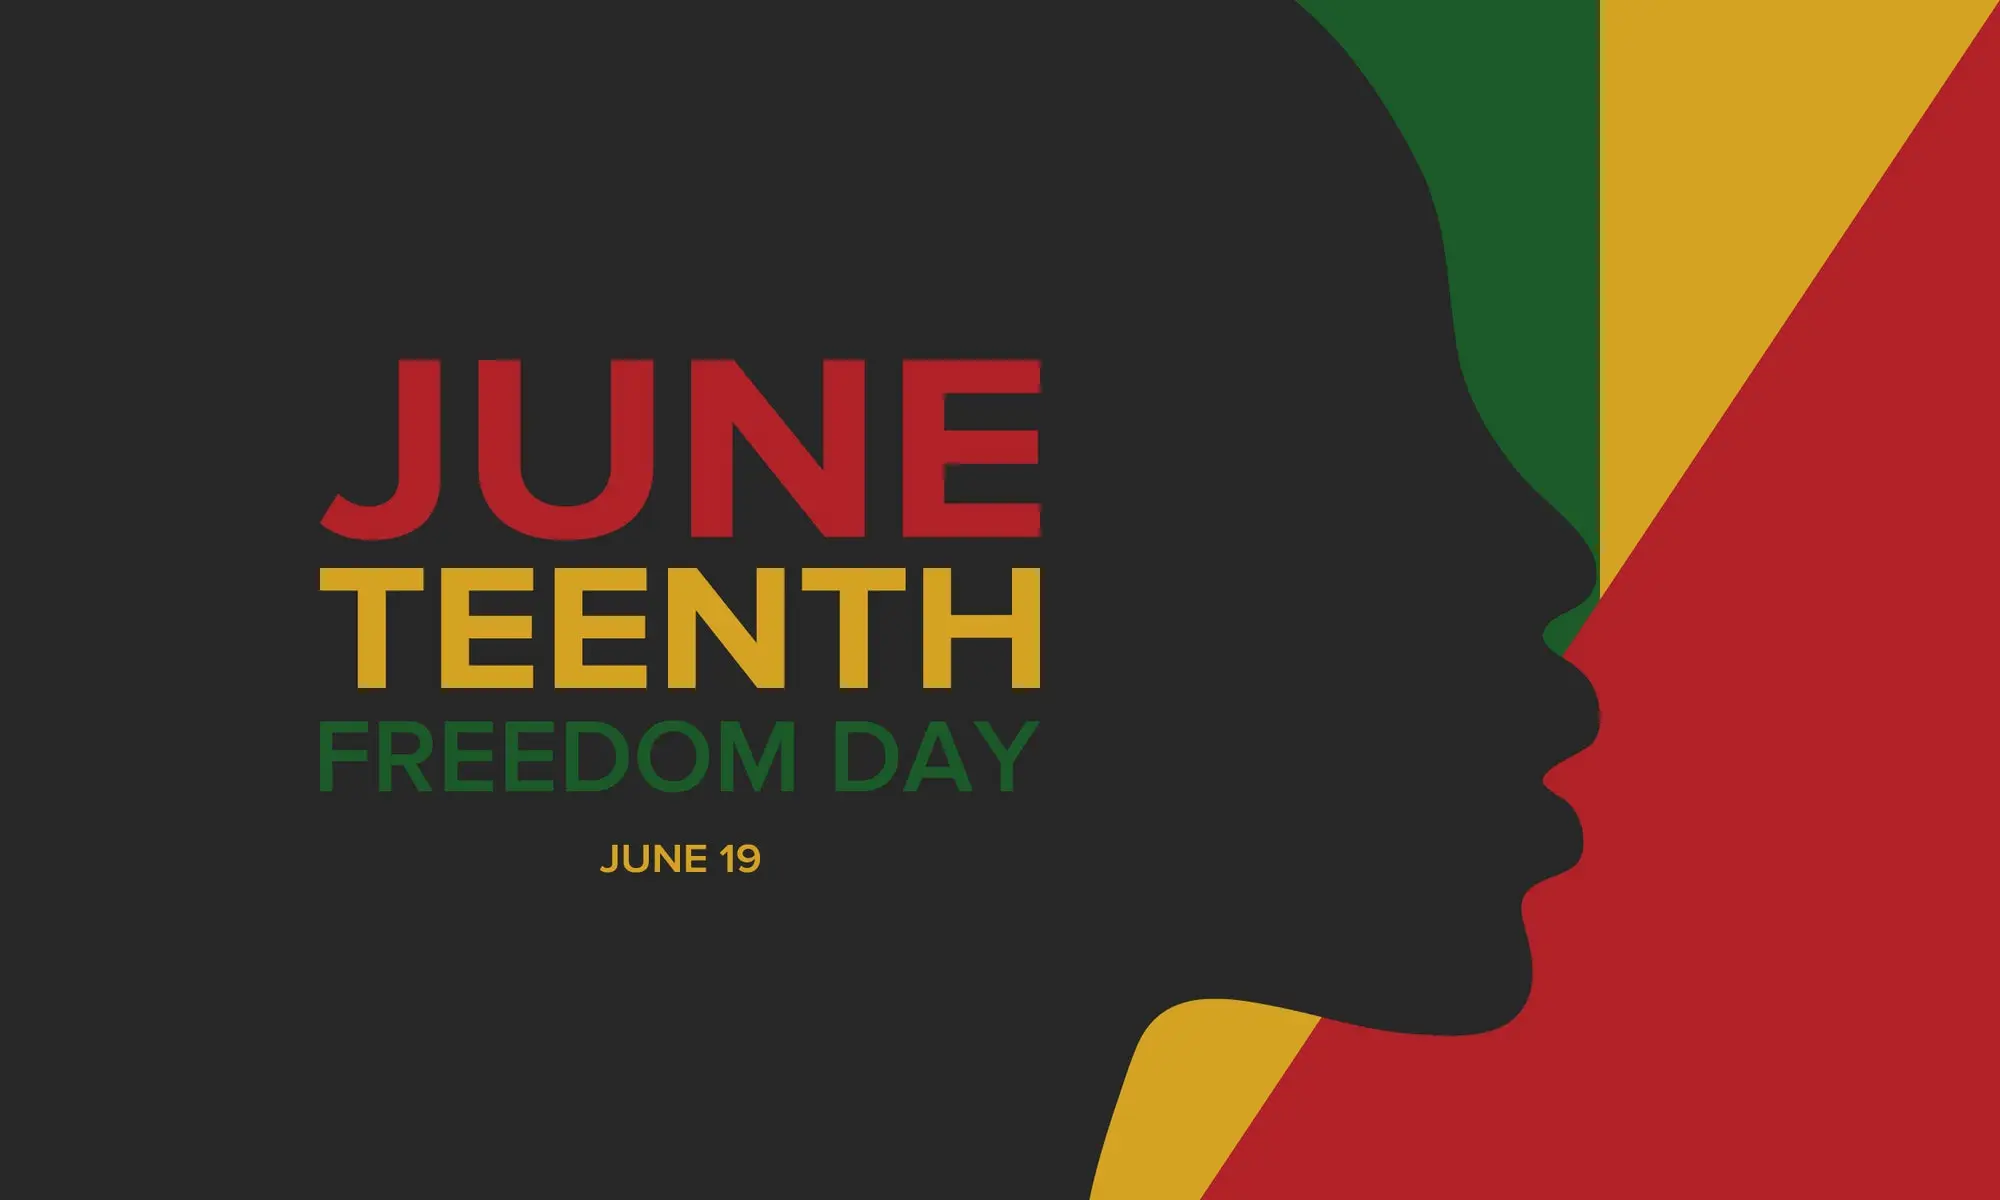 Juneteenth, Freedom Day, June 19